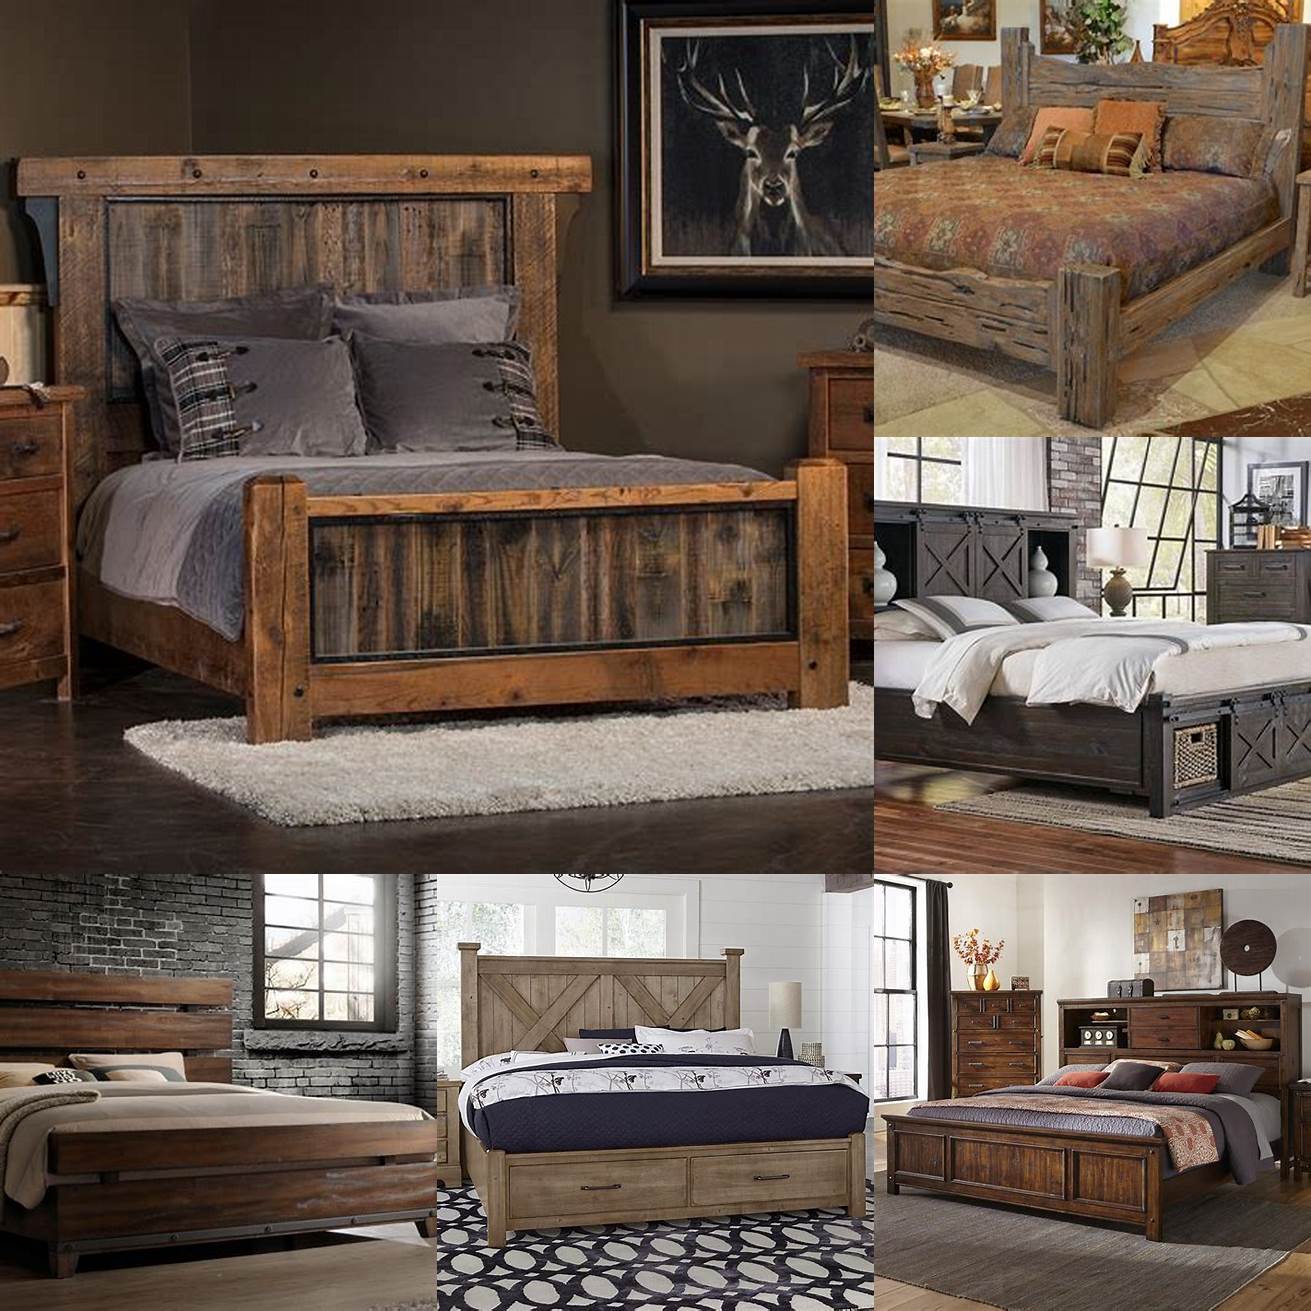 3 A rustic Queen Bed Set with natural materials like wood and earthy colors